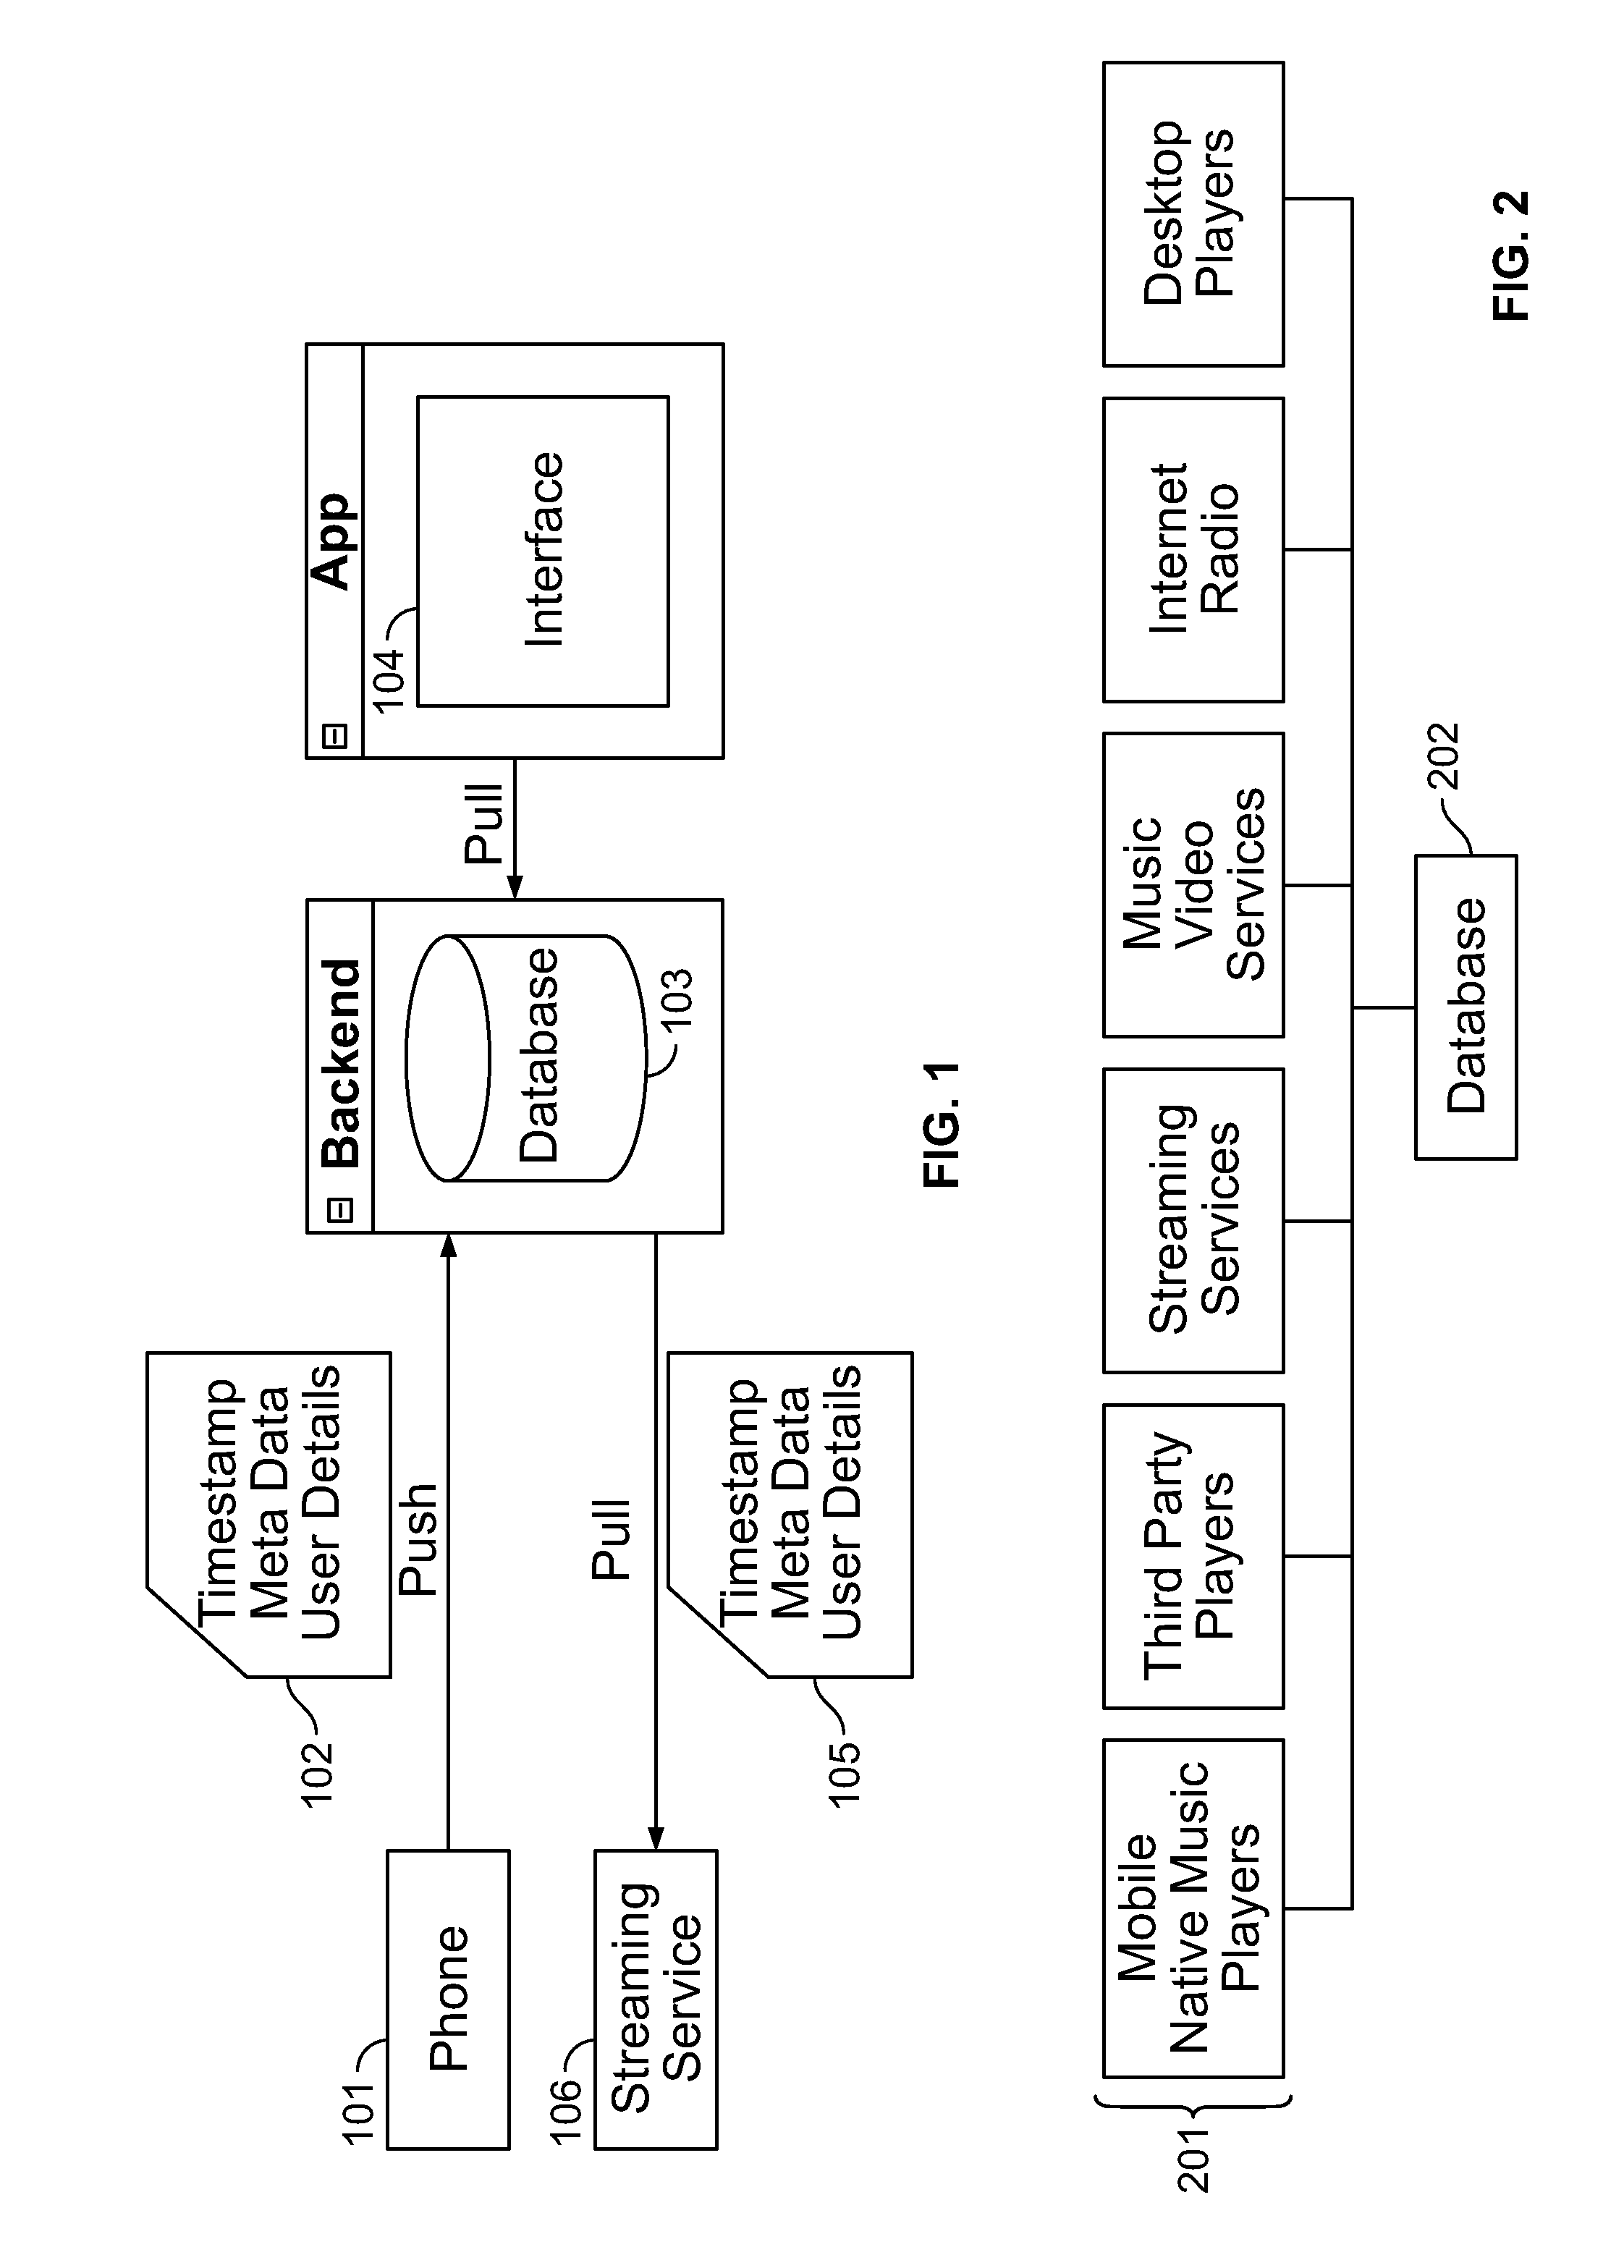 System and method for generating dynamic playlists utilising device co-presence proximity